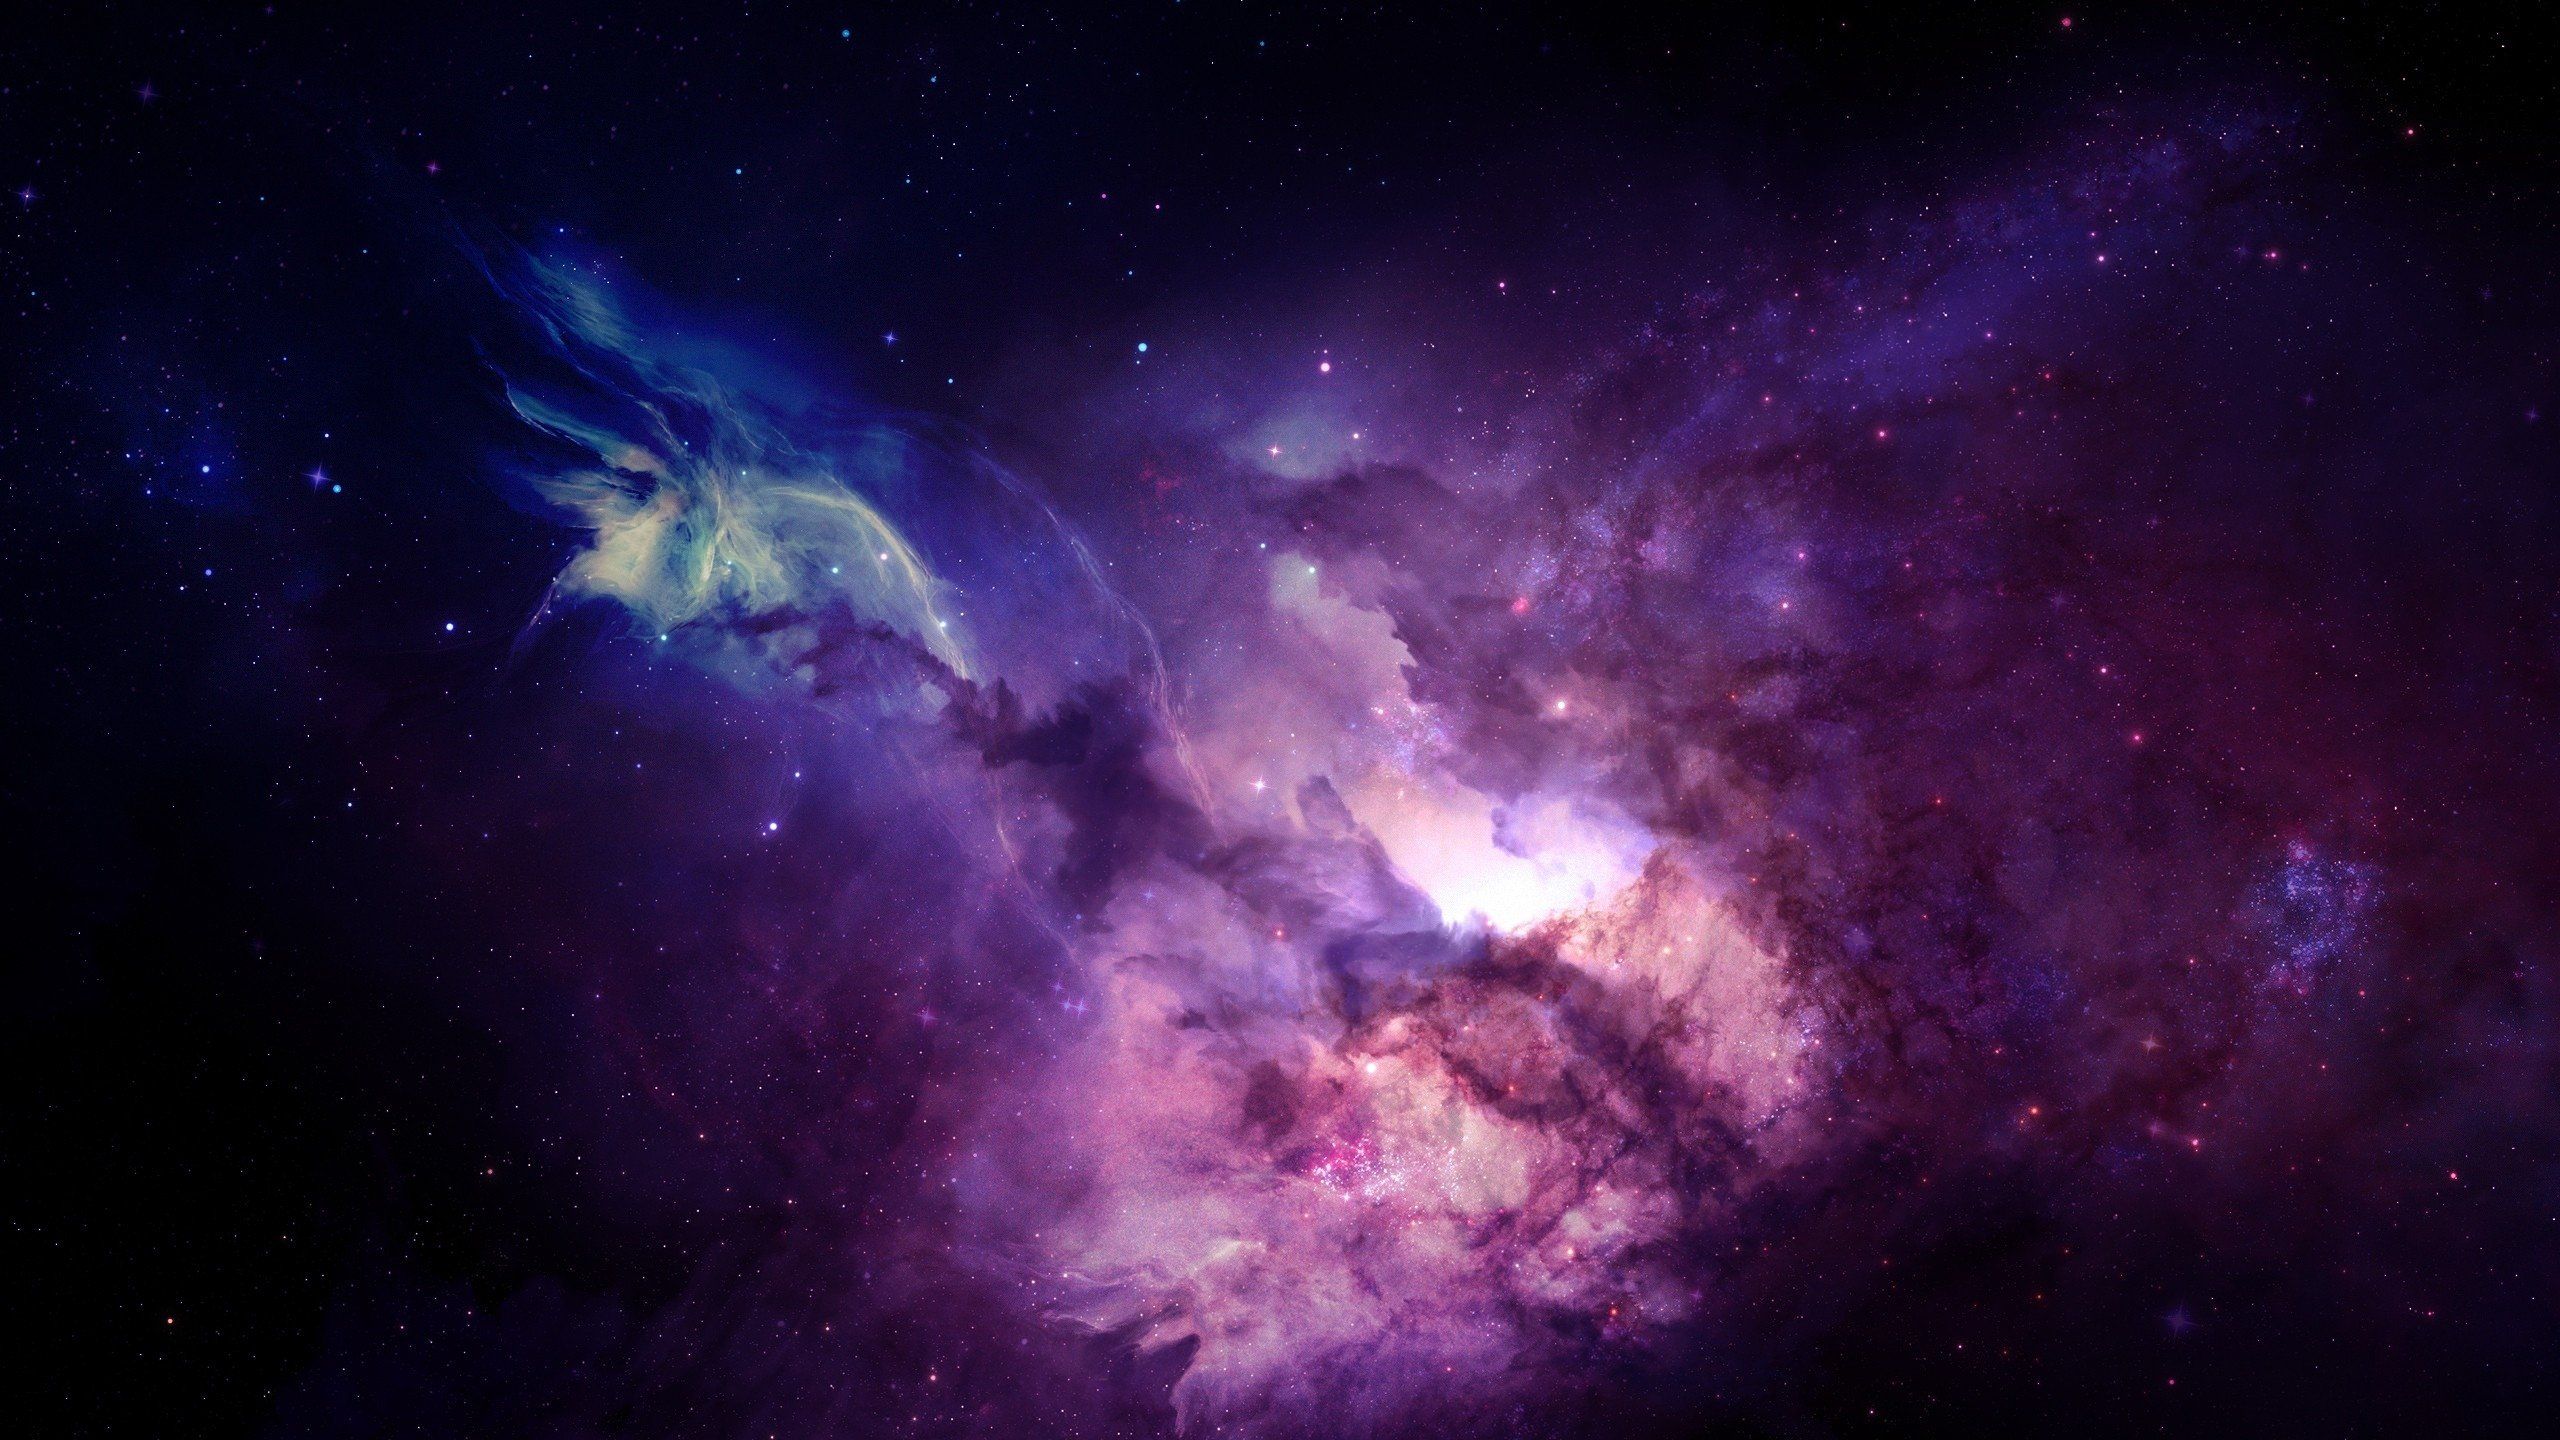 Space wallpaper 1920x1200 for android 4.0.4 - 2560x1440